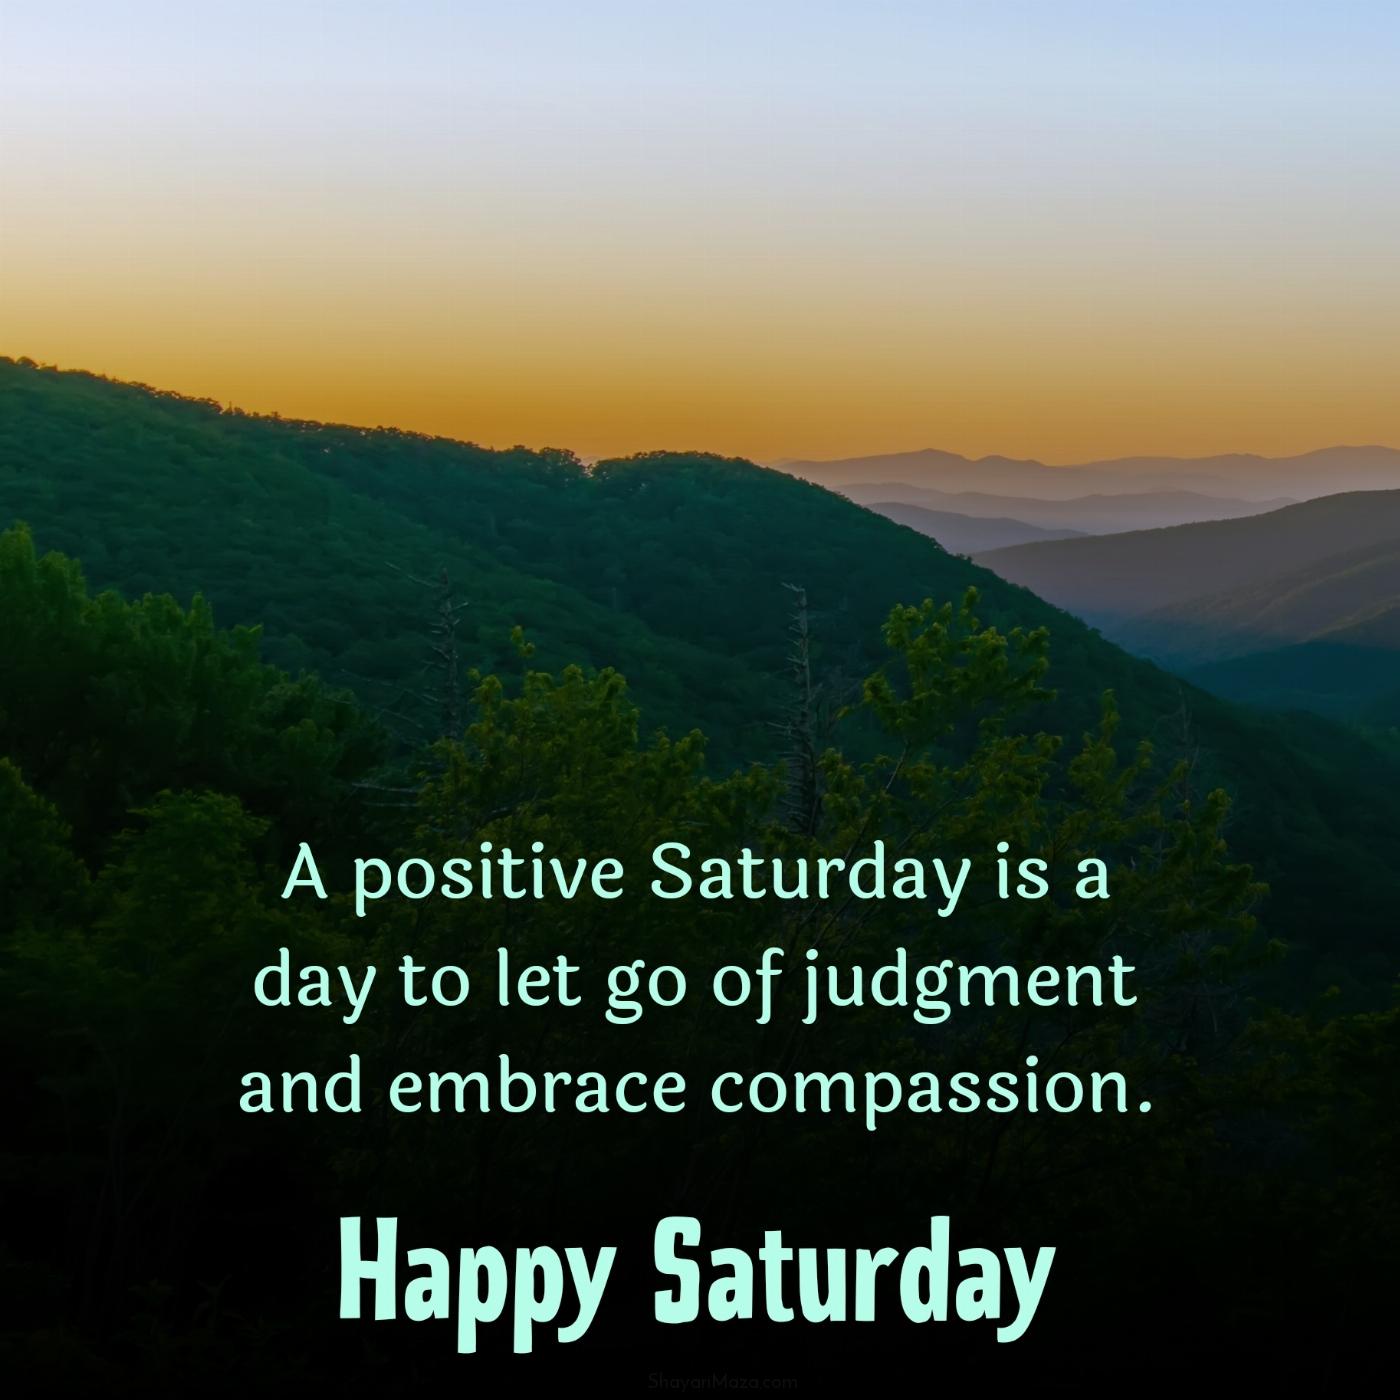 A positive Saturday is a day to let go of judgment